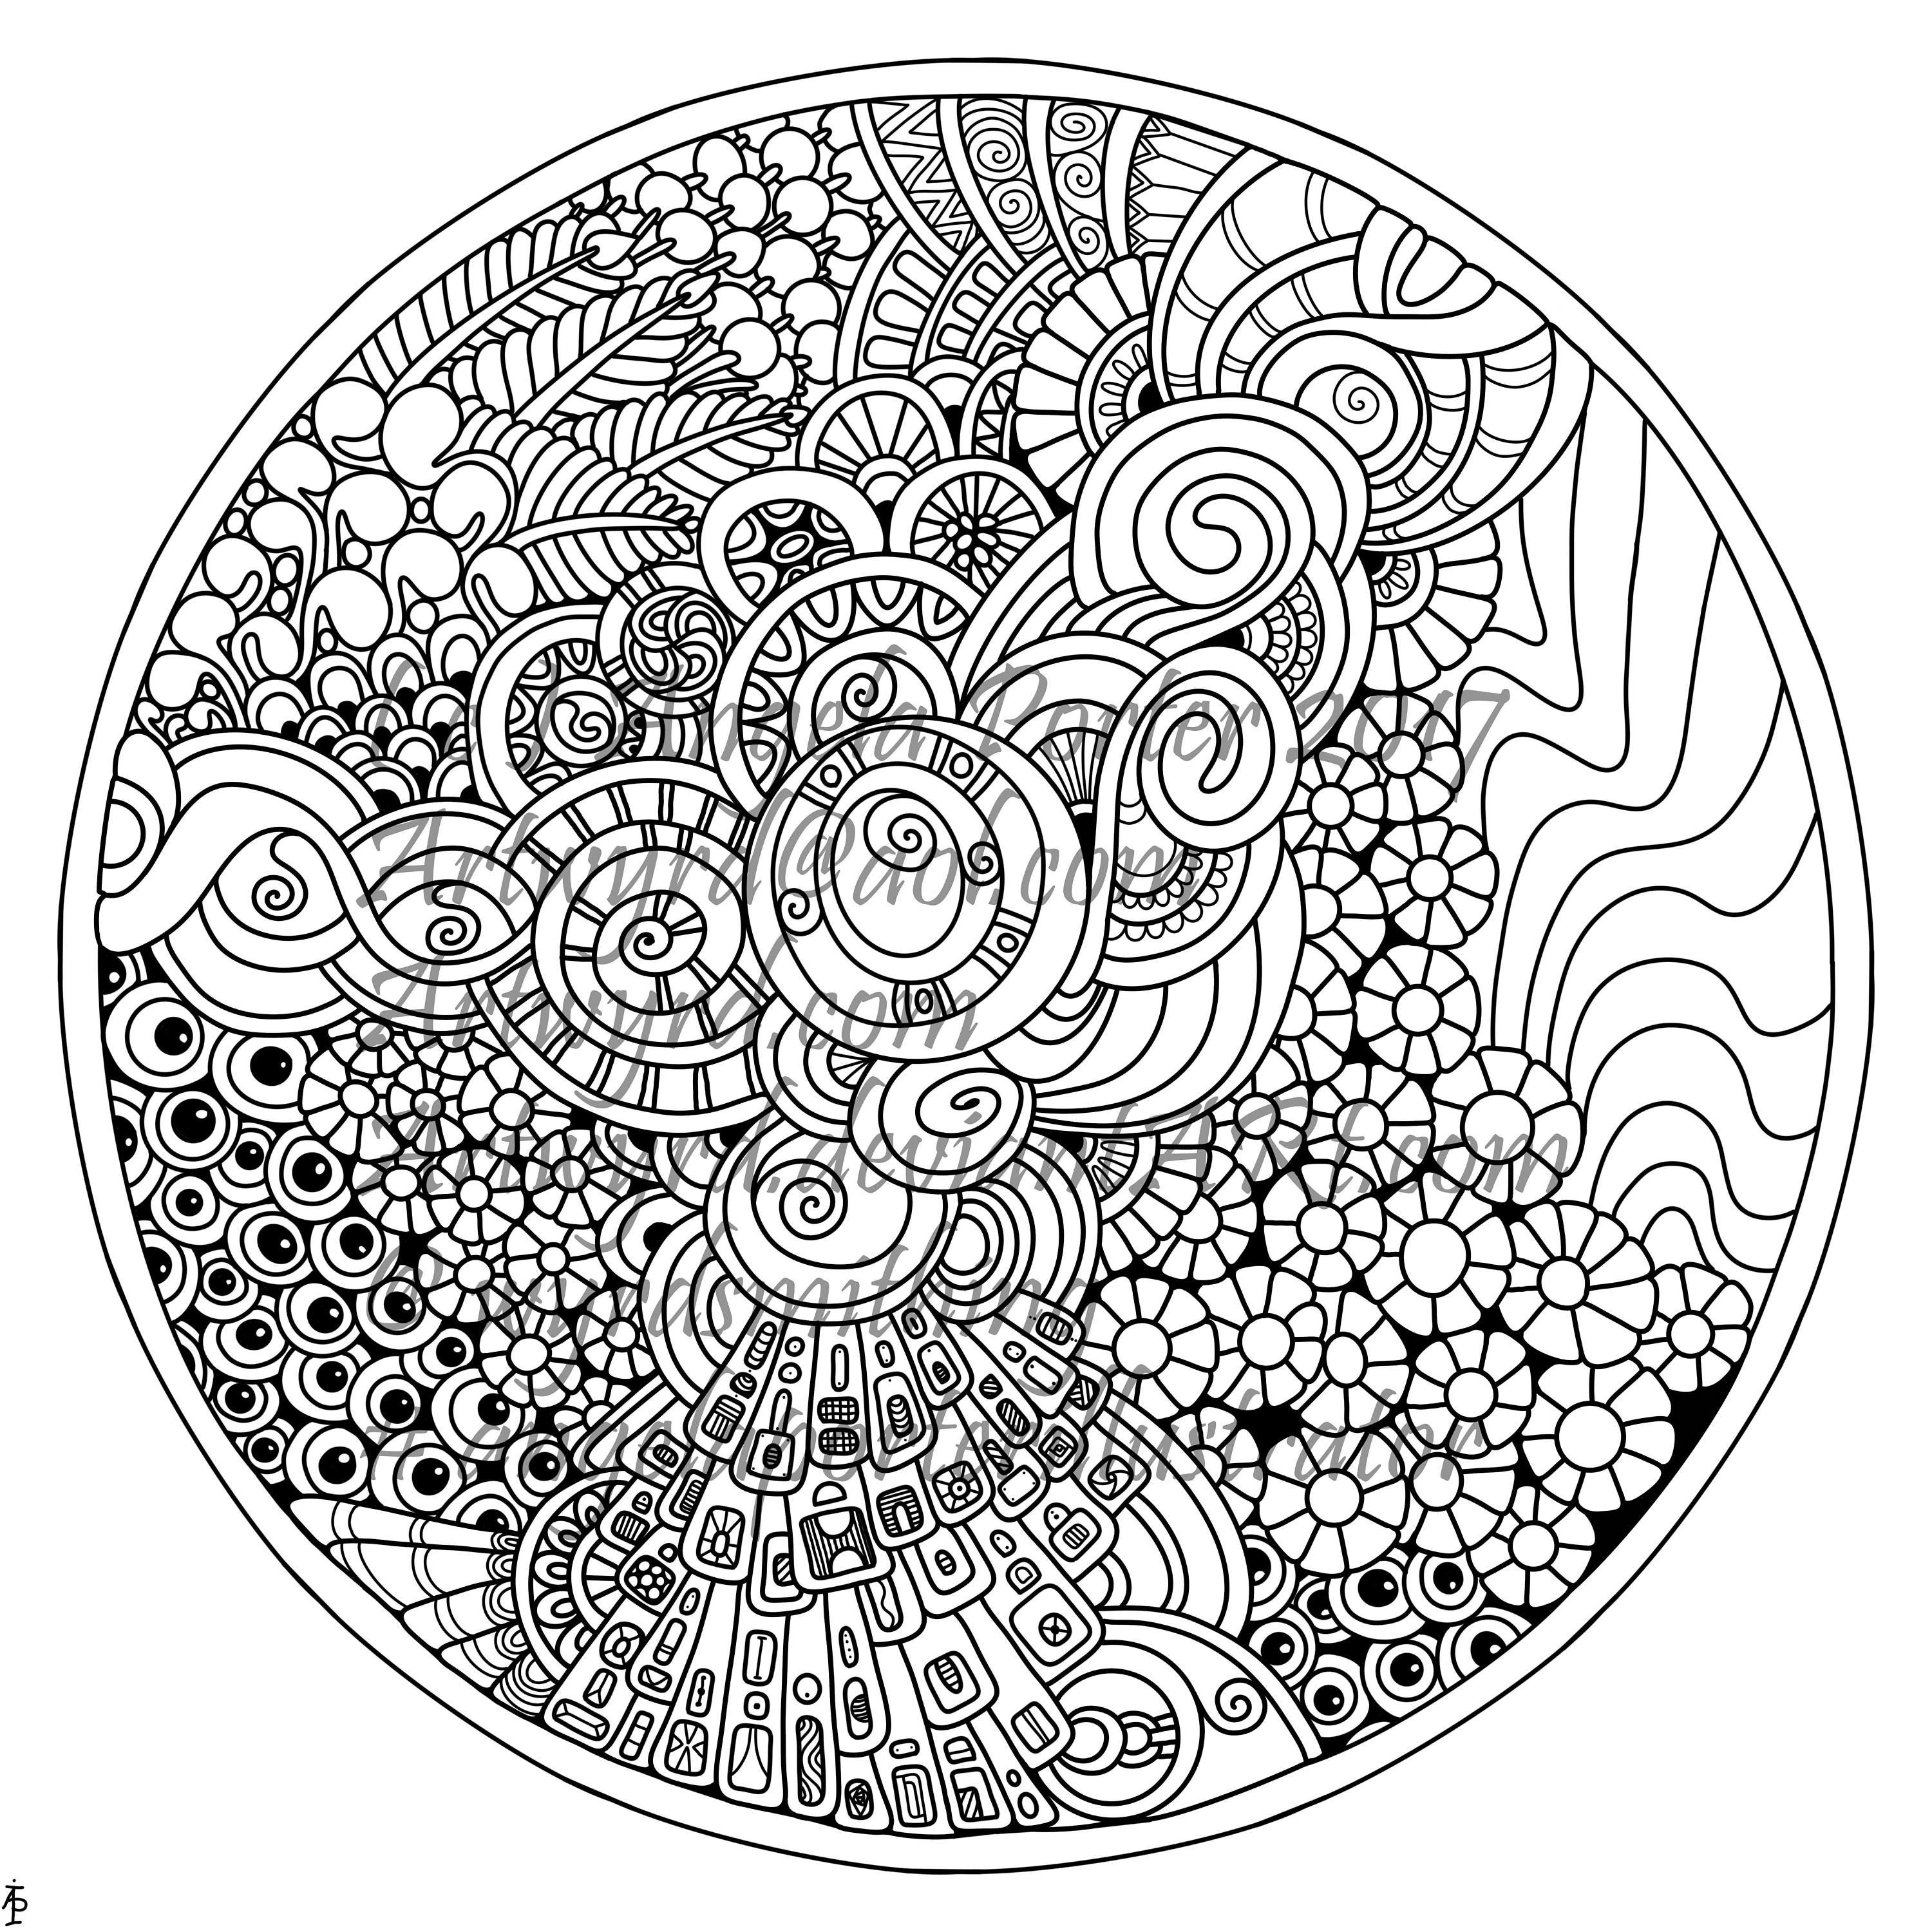 Angela Porter's Zen Doodle Designs: New York Times Bestselling Artists' Adult Coloring Books [Book]